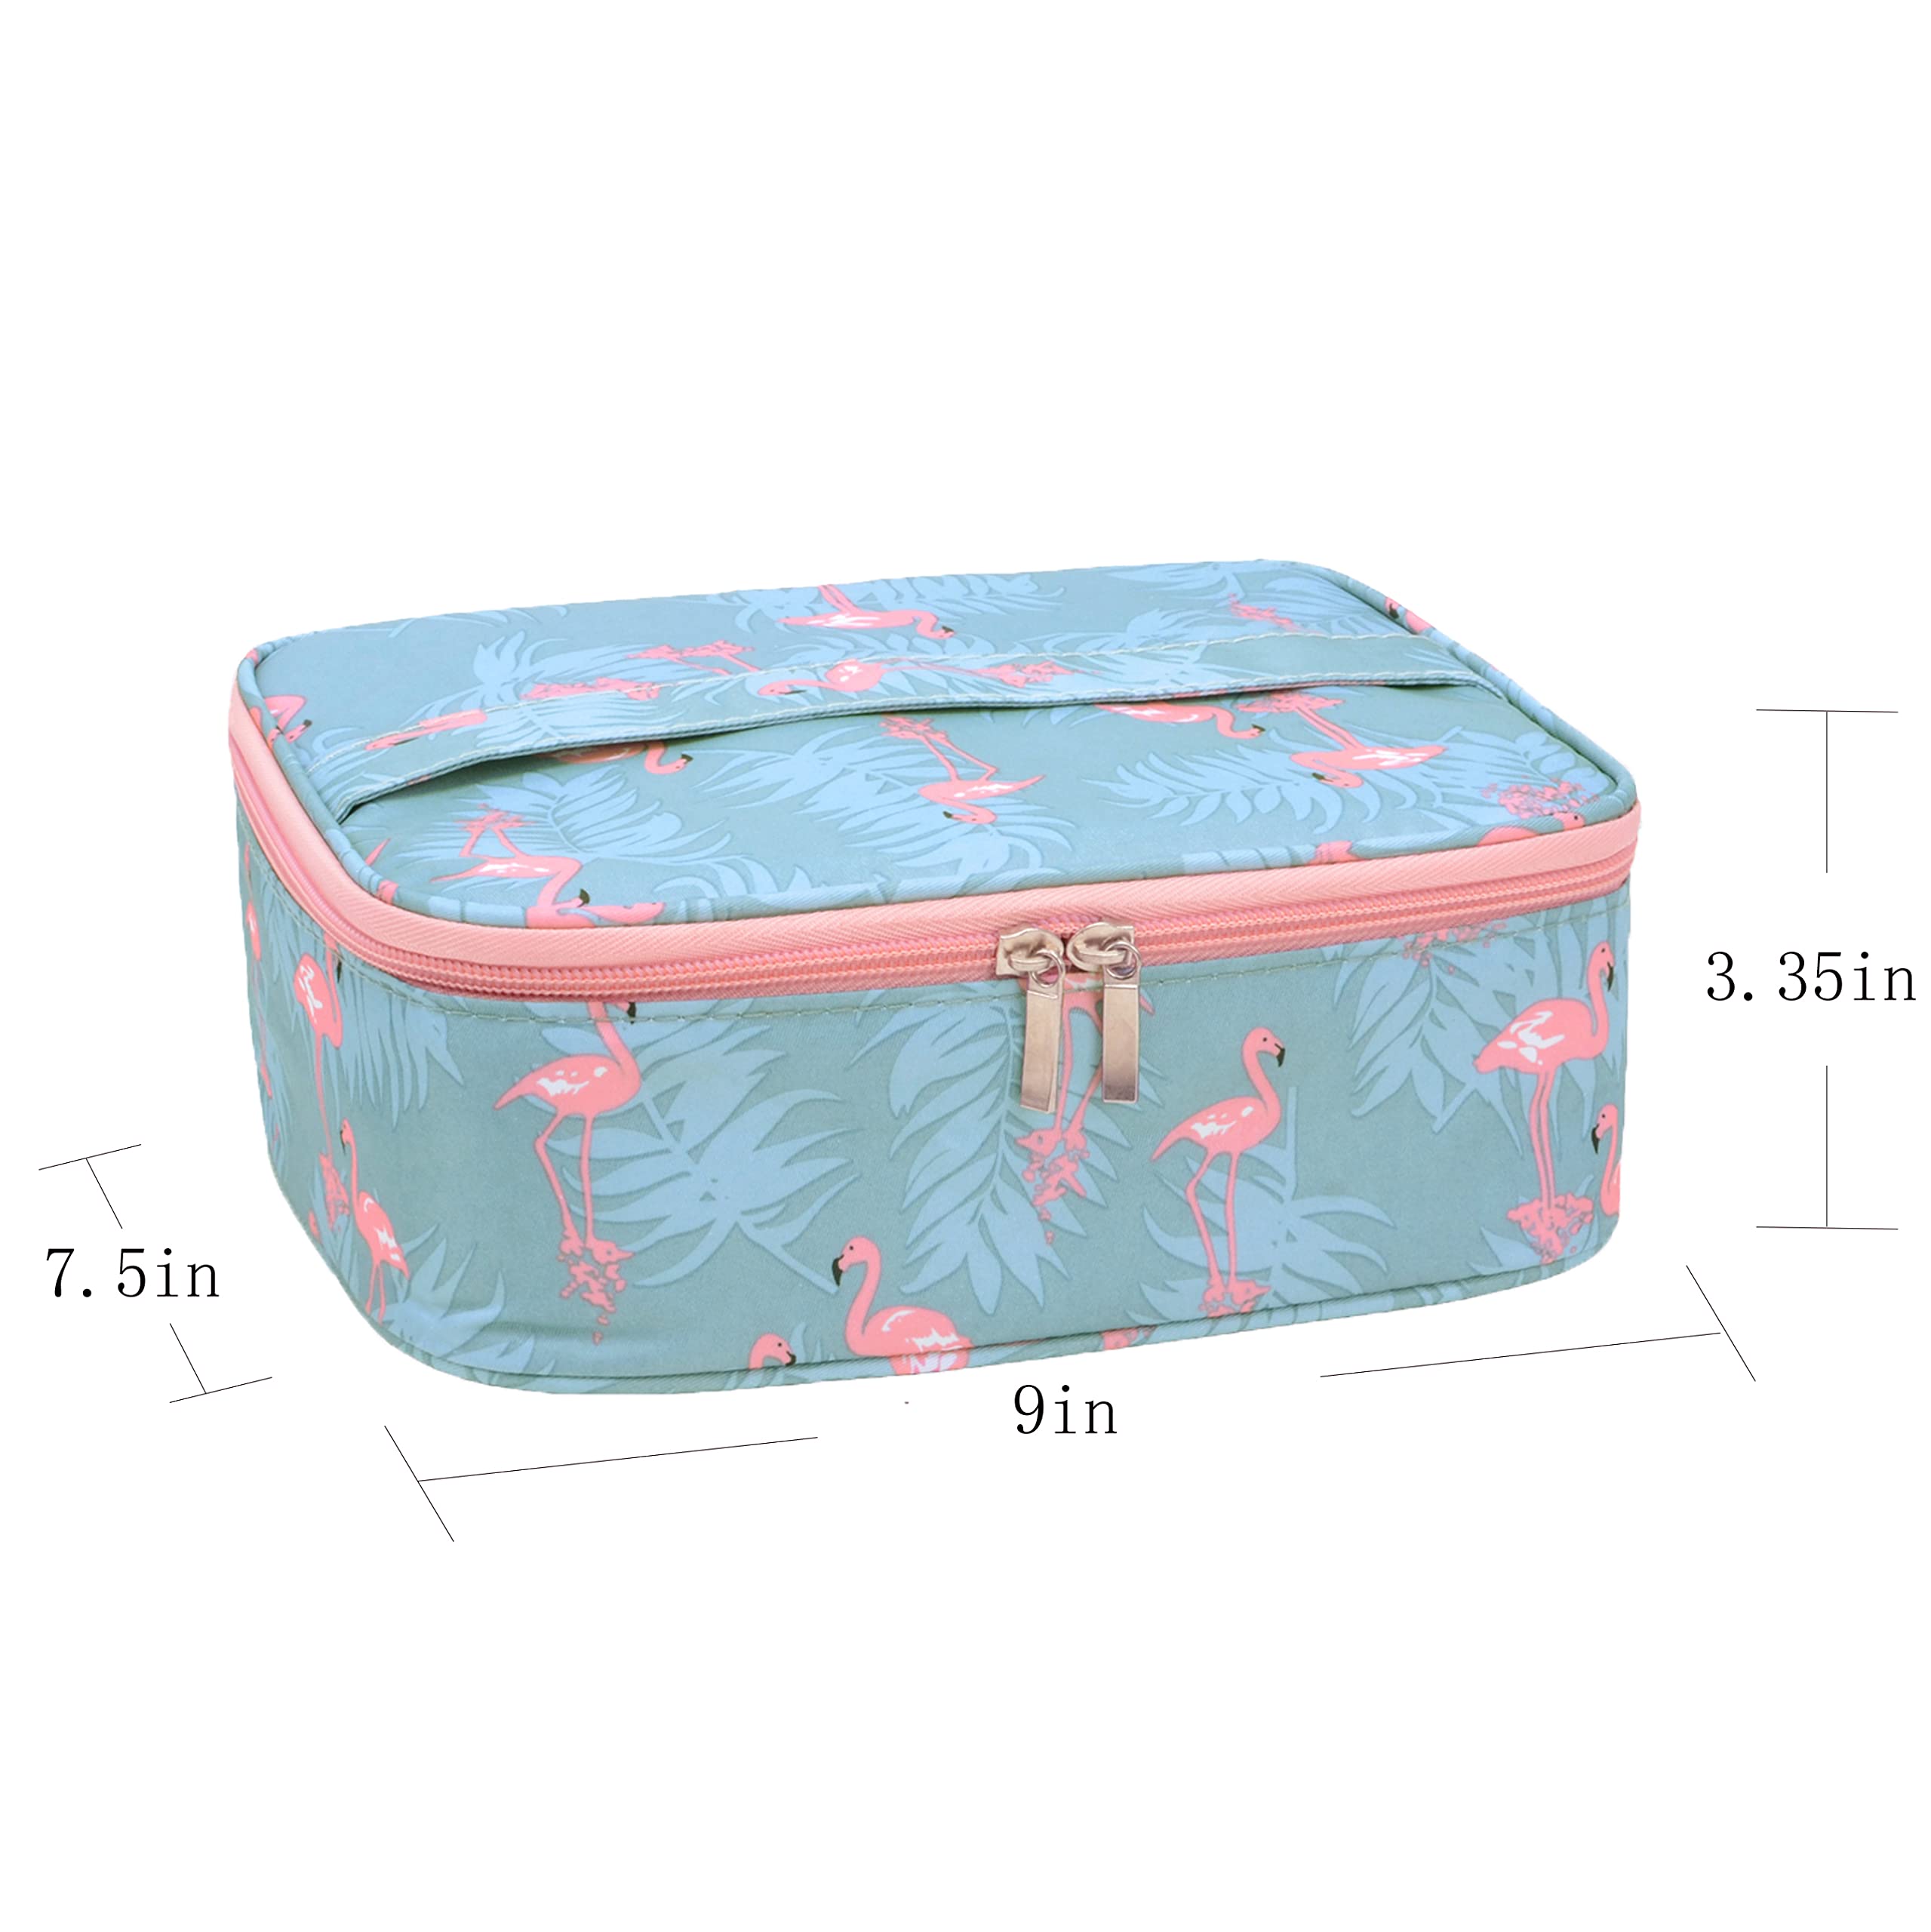 MKPCW Portable Travel Makeup Cosmetic Bags Organizer Multifunction Case Toiletry Bags for Women (color1)